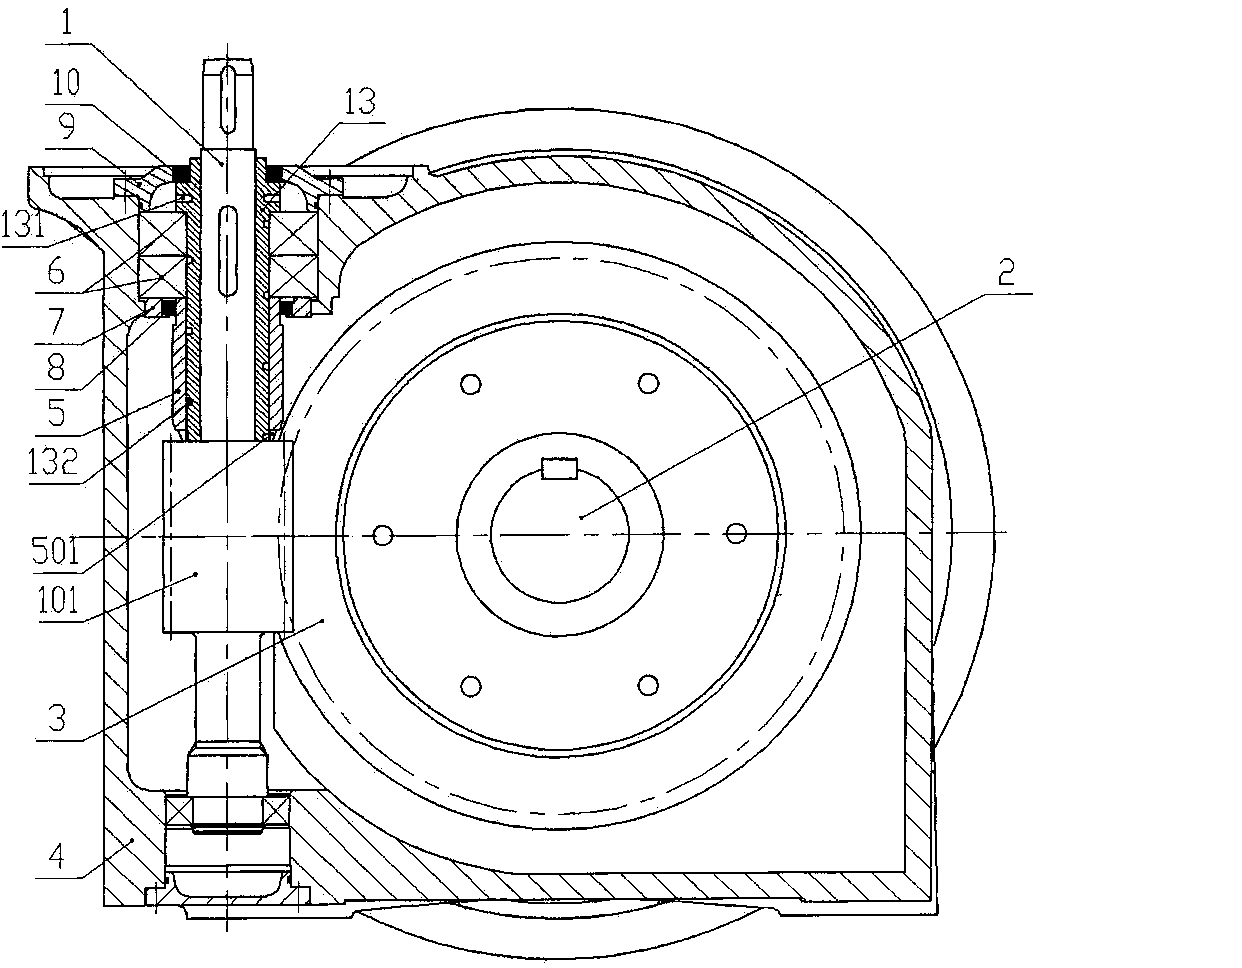 Bearing lubricating structure of reduction box